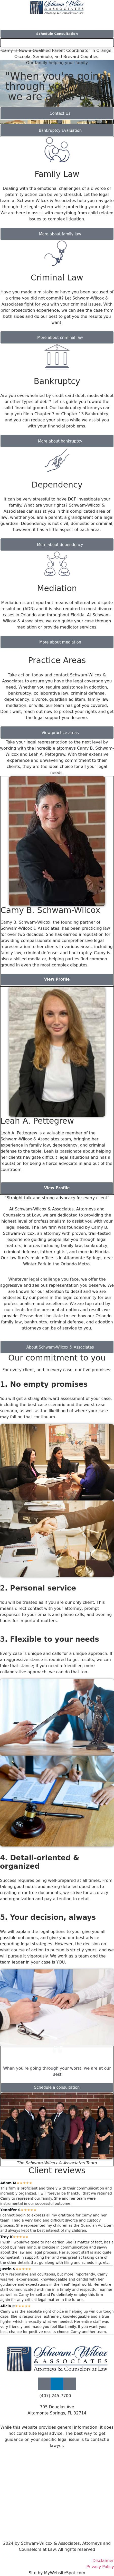 Schwam-Wilcox & Associates, Attorneys and Counselors at Law - Kissimmee FL Lawyers